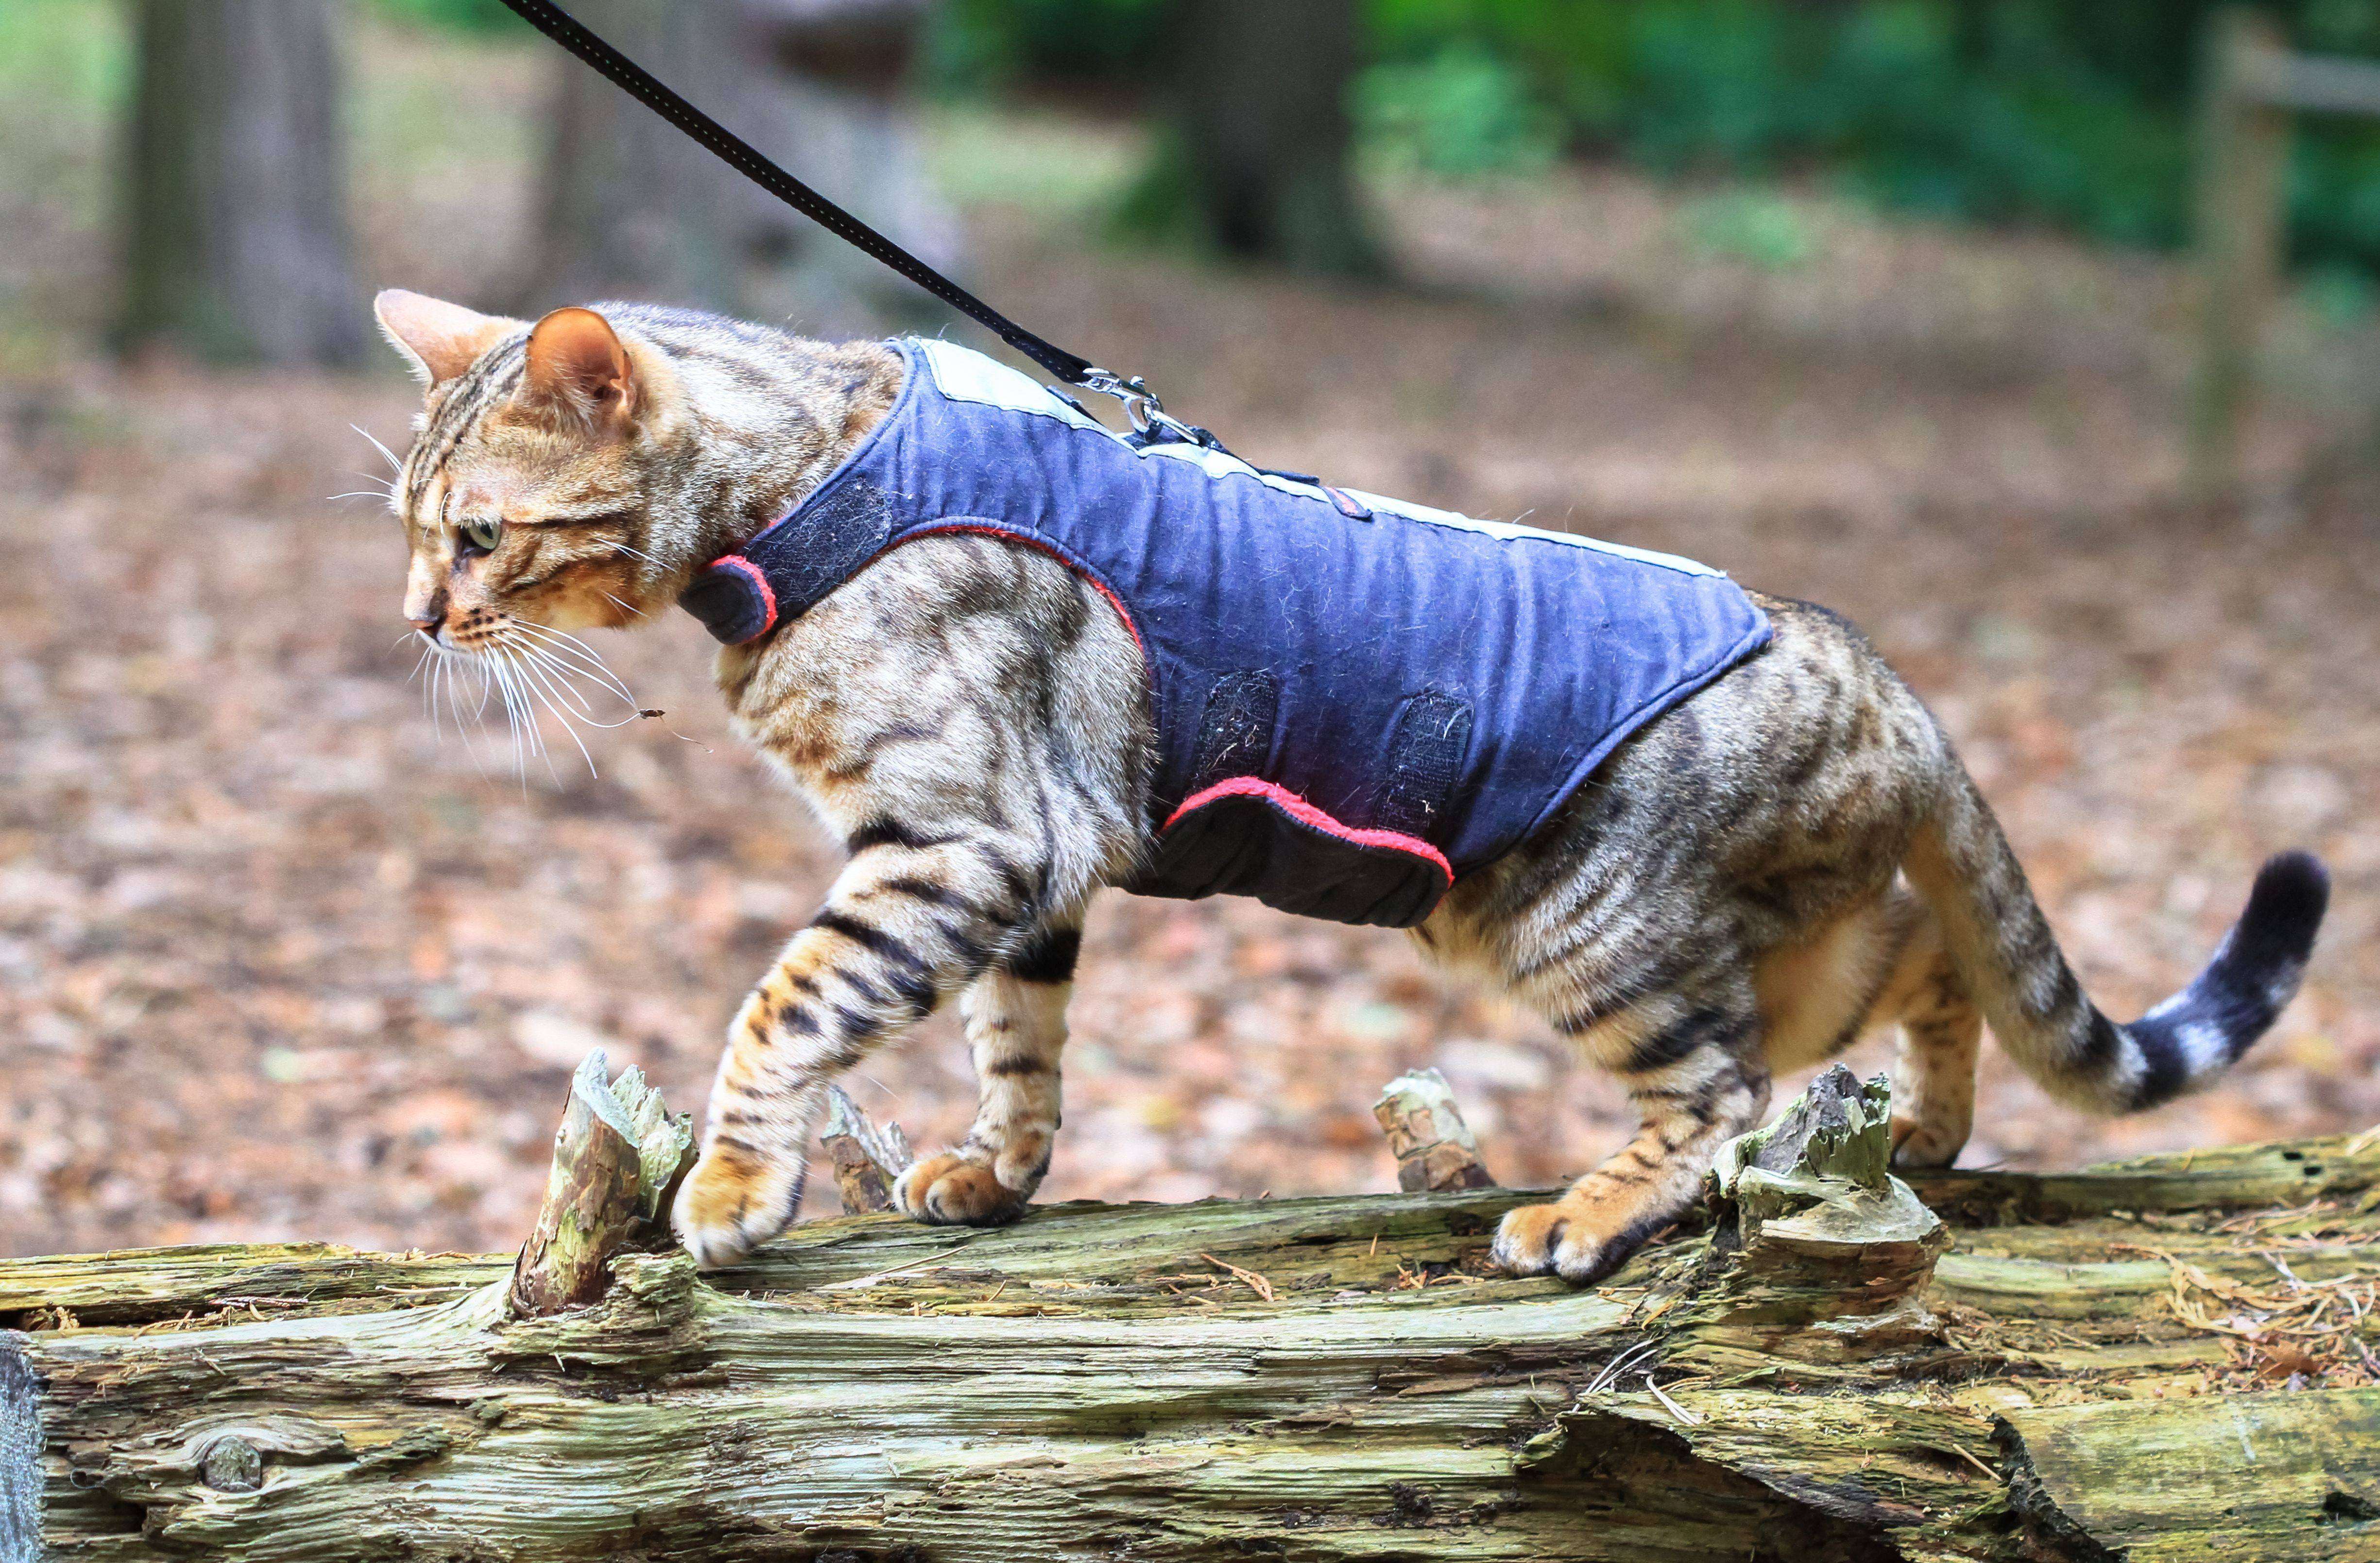 New laws allow walking feline friends in cat containment zones from July